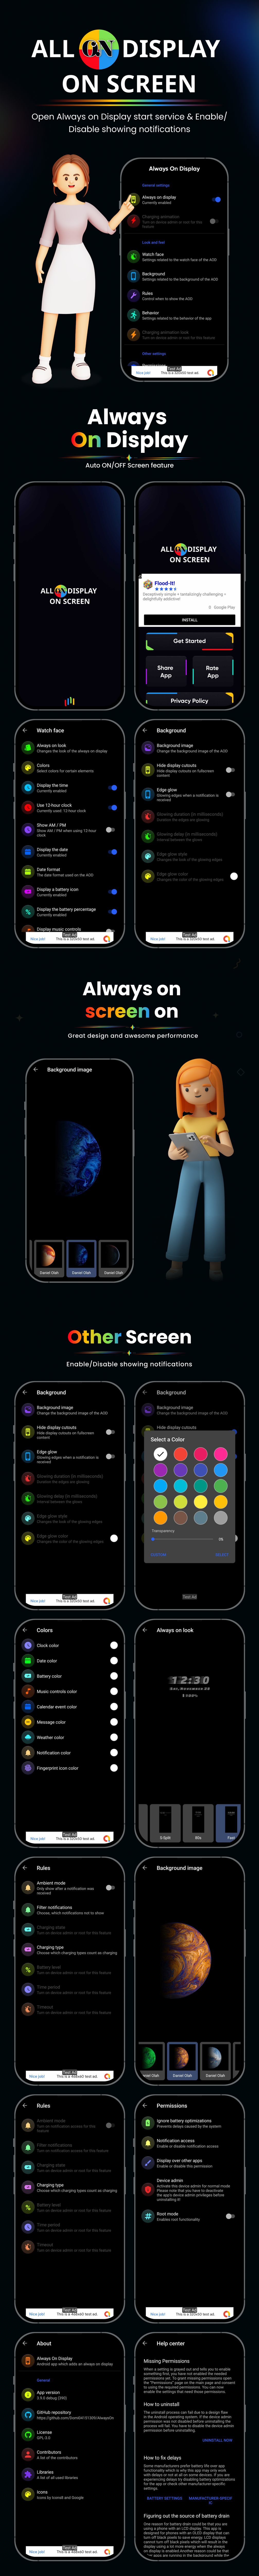 All On Display On Screen |  All In On Screen | Admob Ads | Android - 1